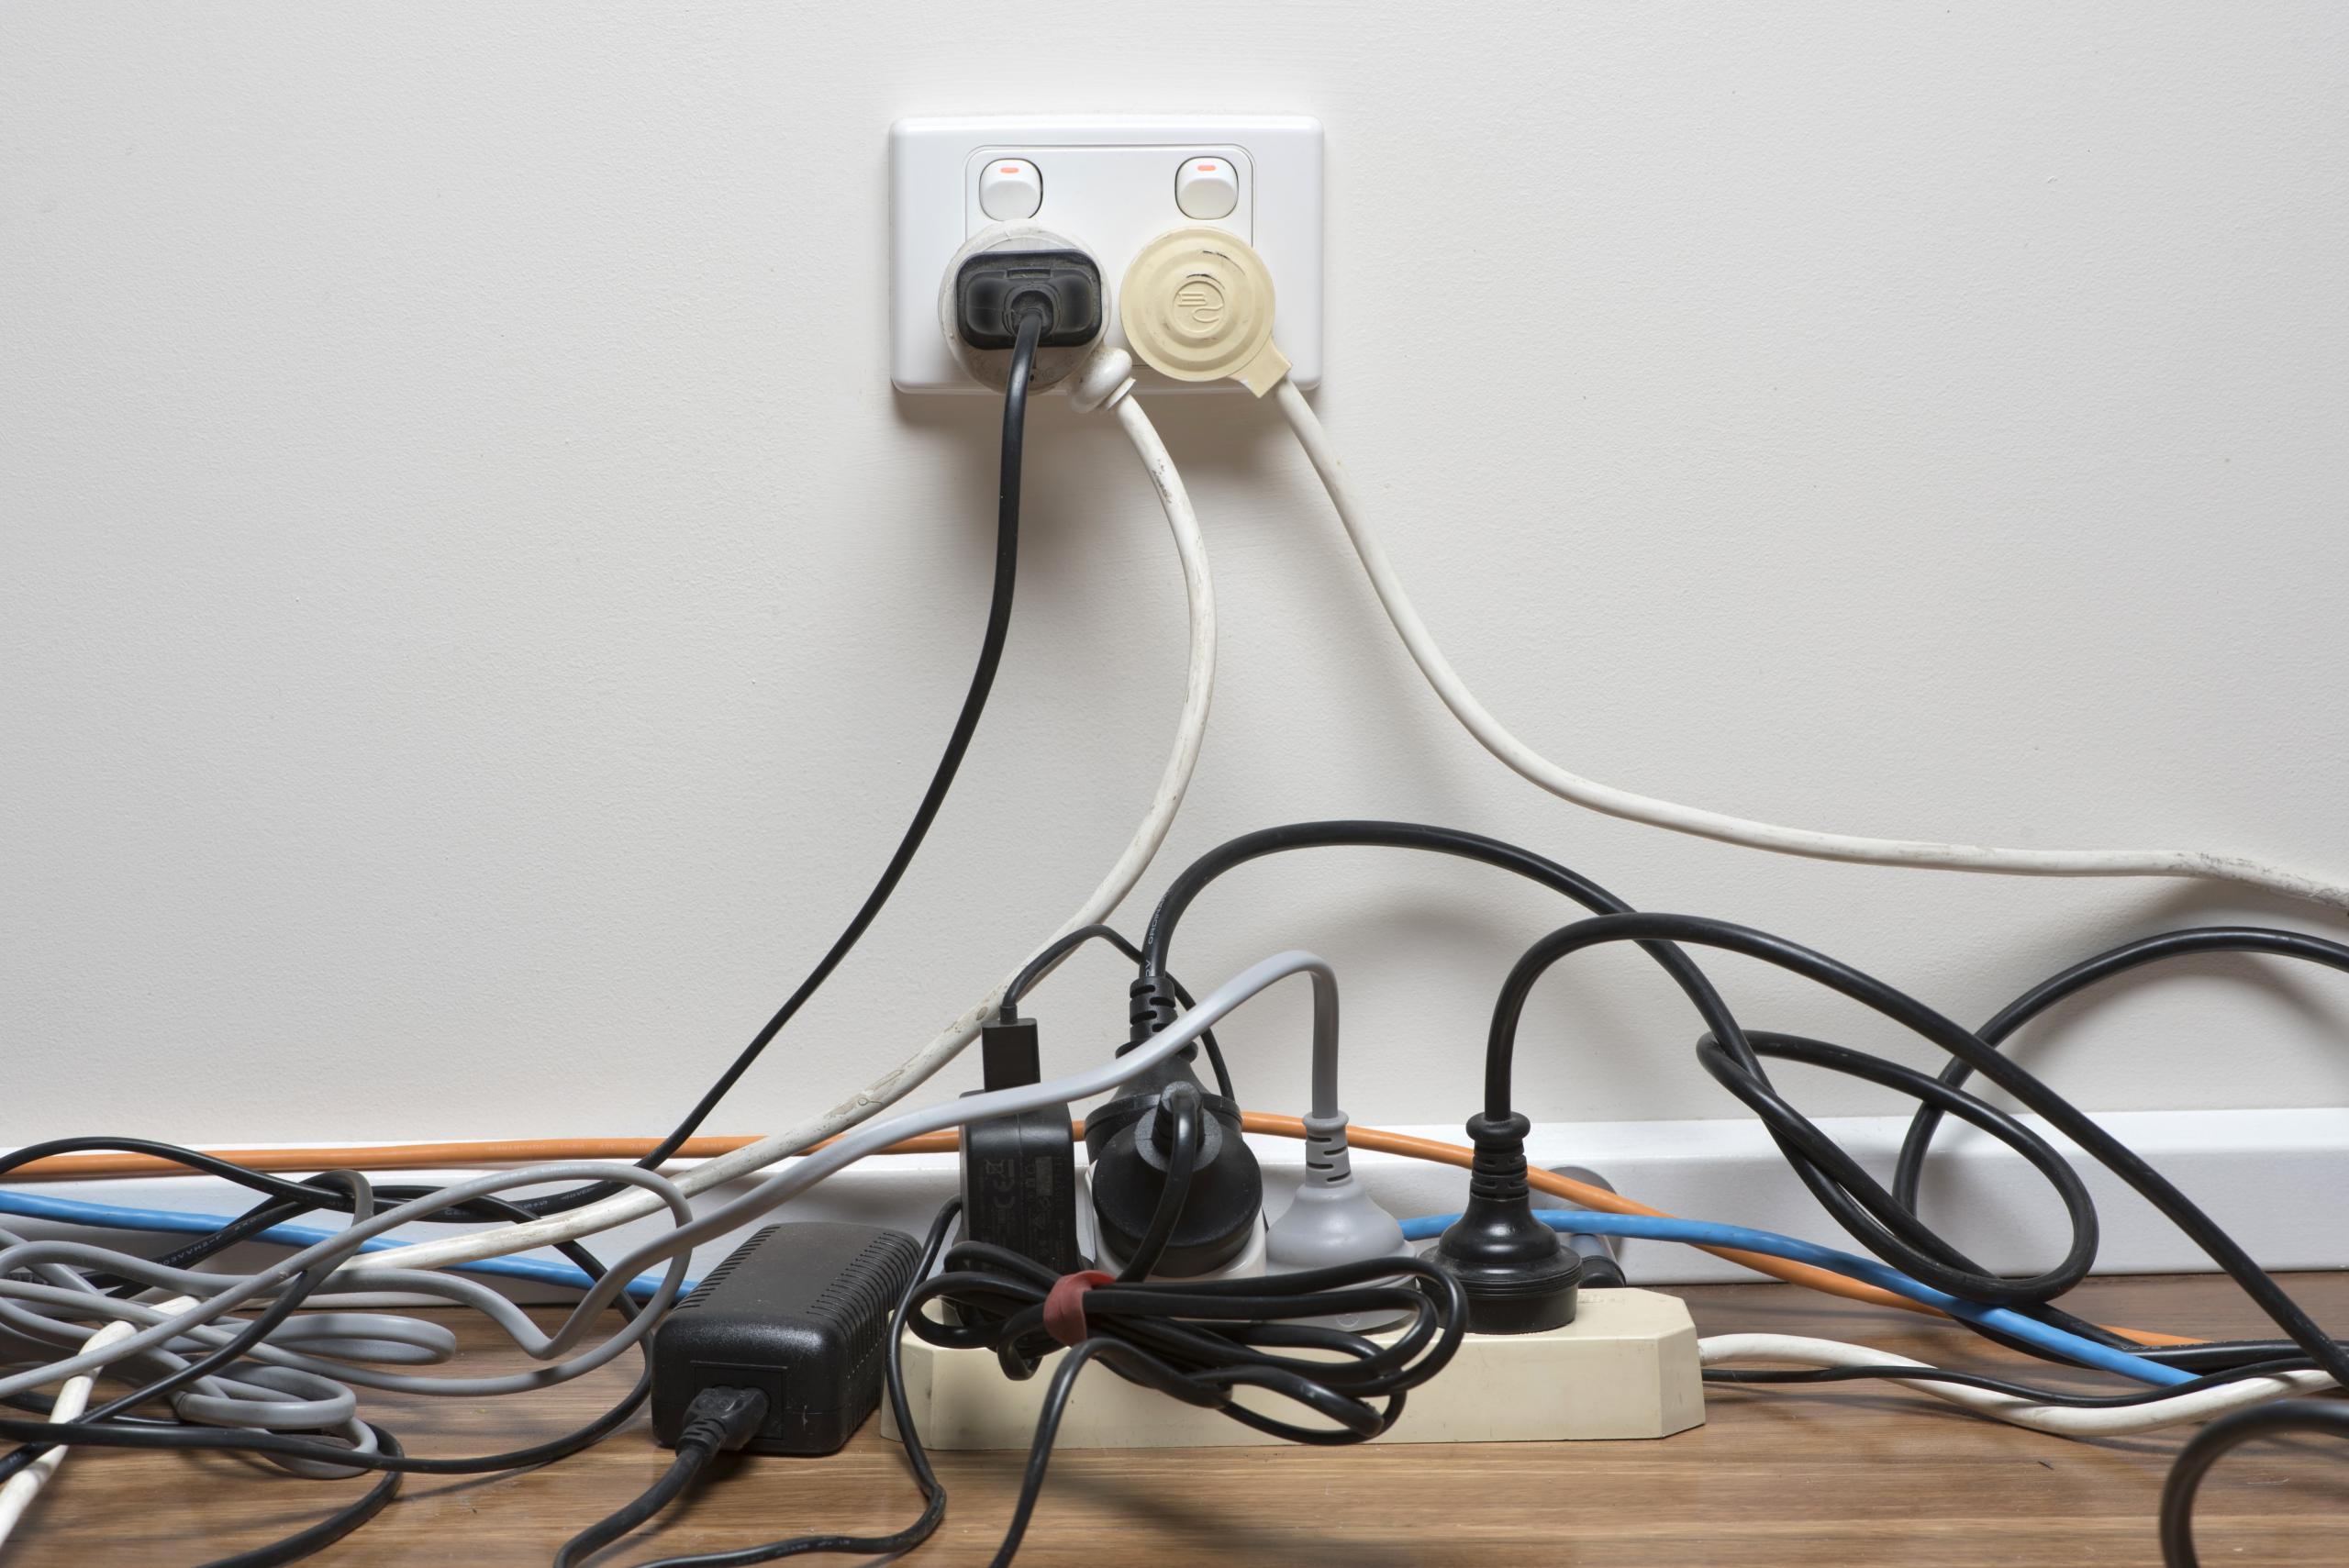 How to Avoid Electrical Overload and Save Your Home